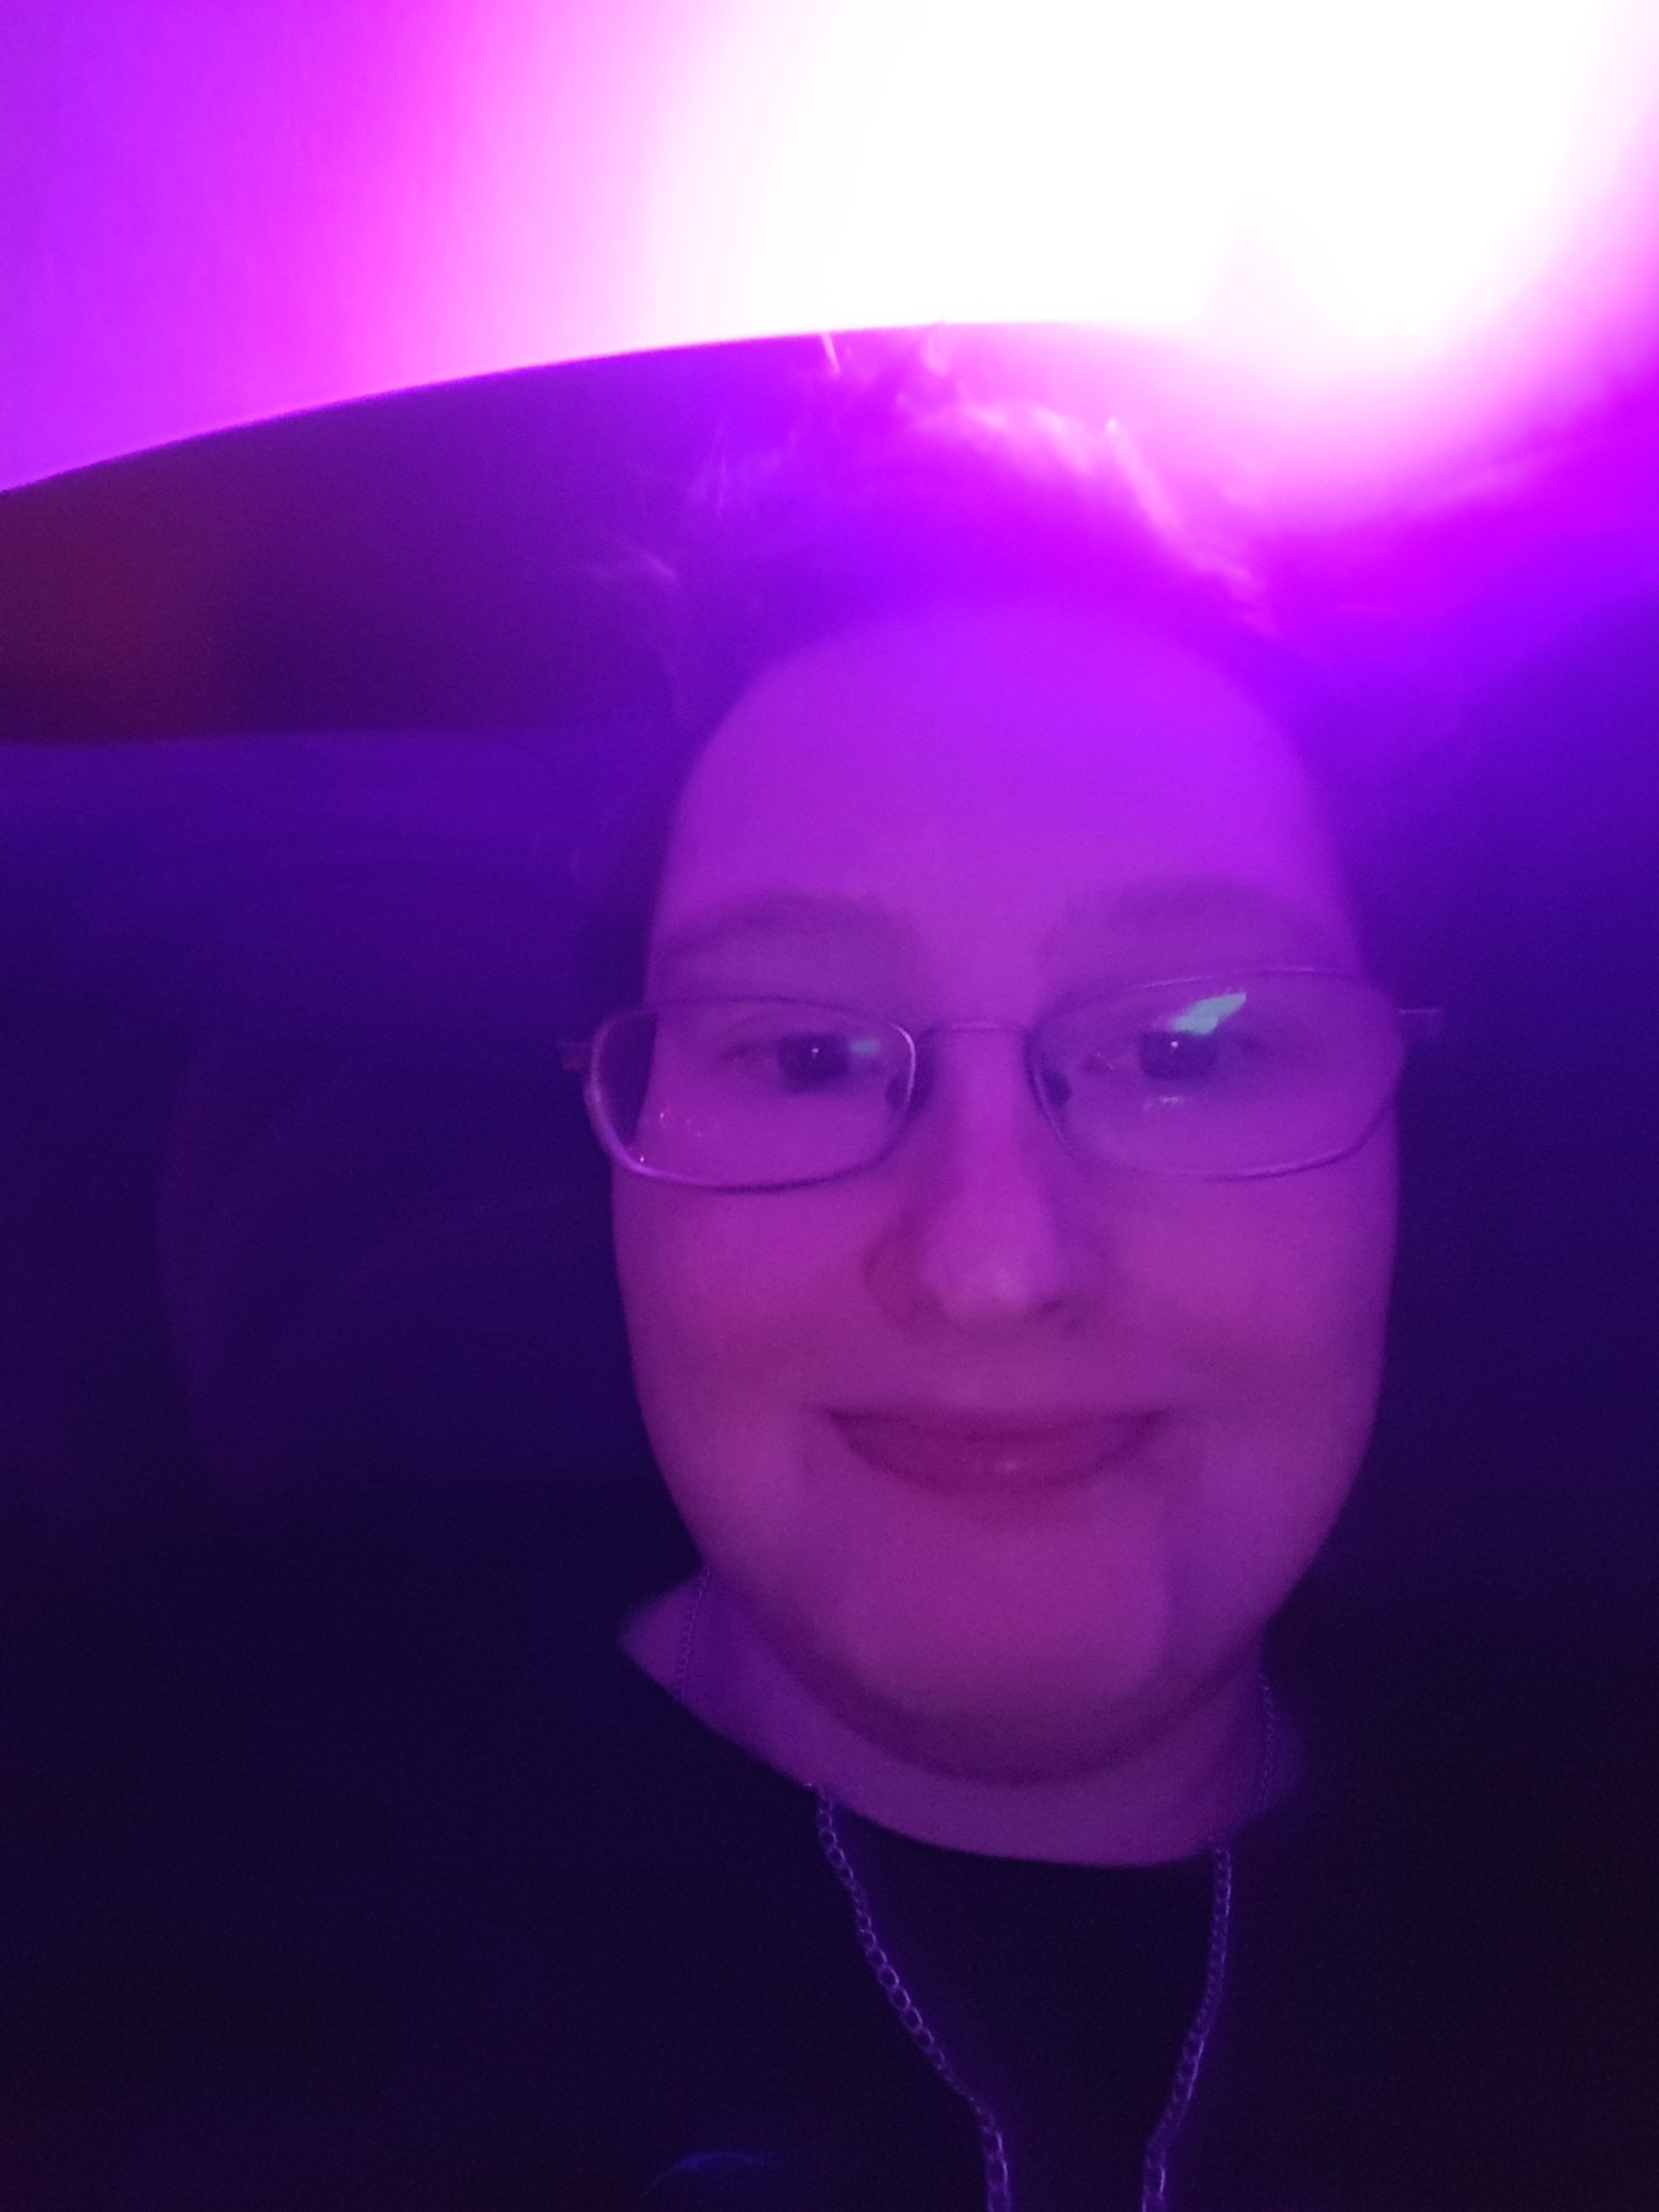 A photo of Danni's face. Their head is resting on a pillow. The entire image is tinted purple from the light in the top right corner.